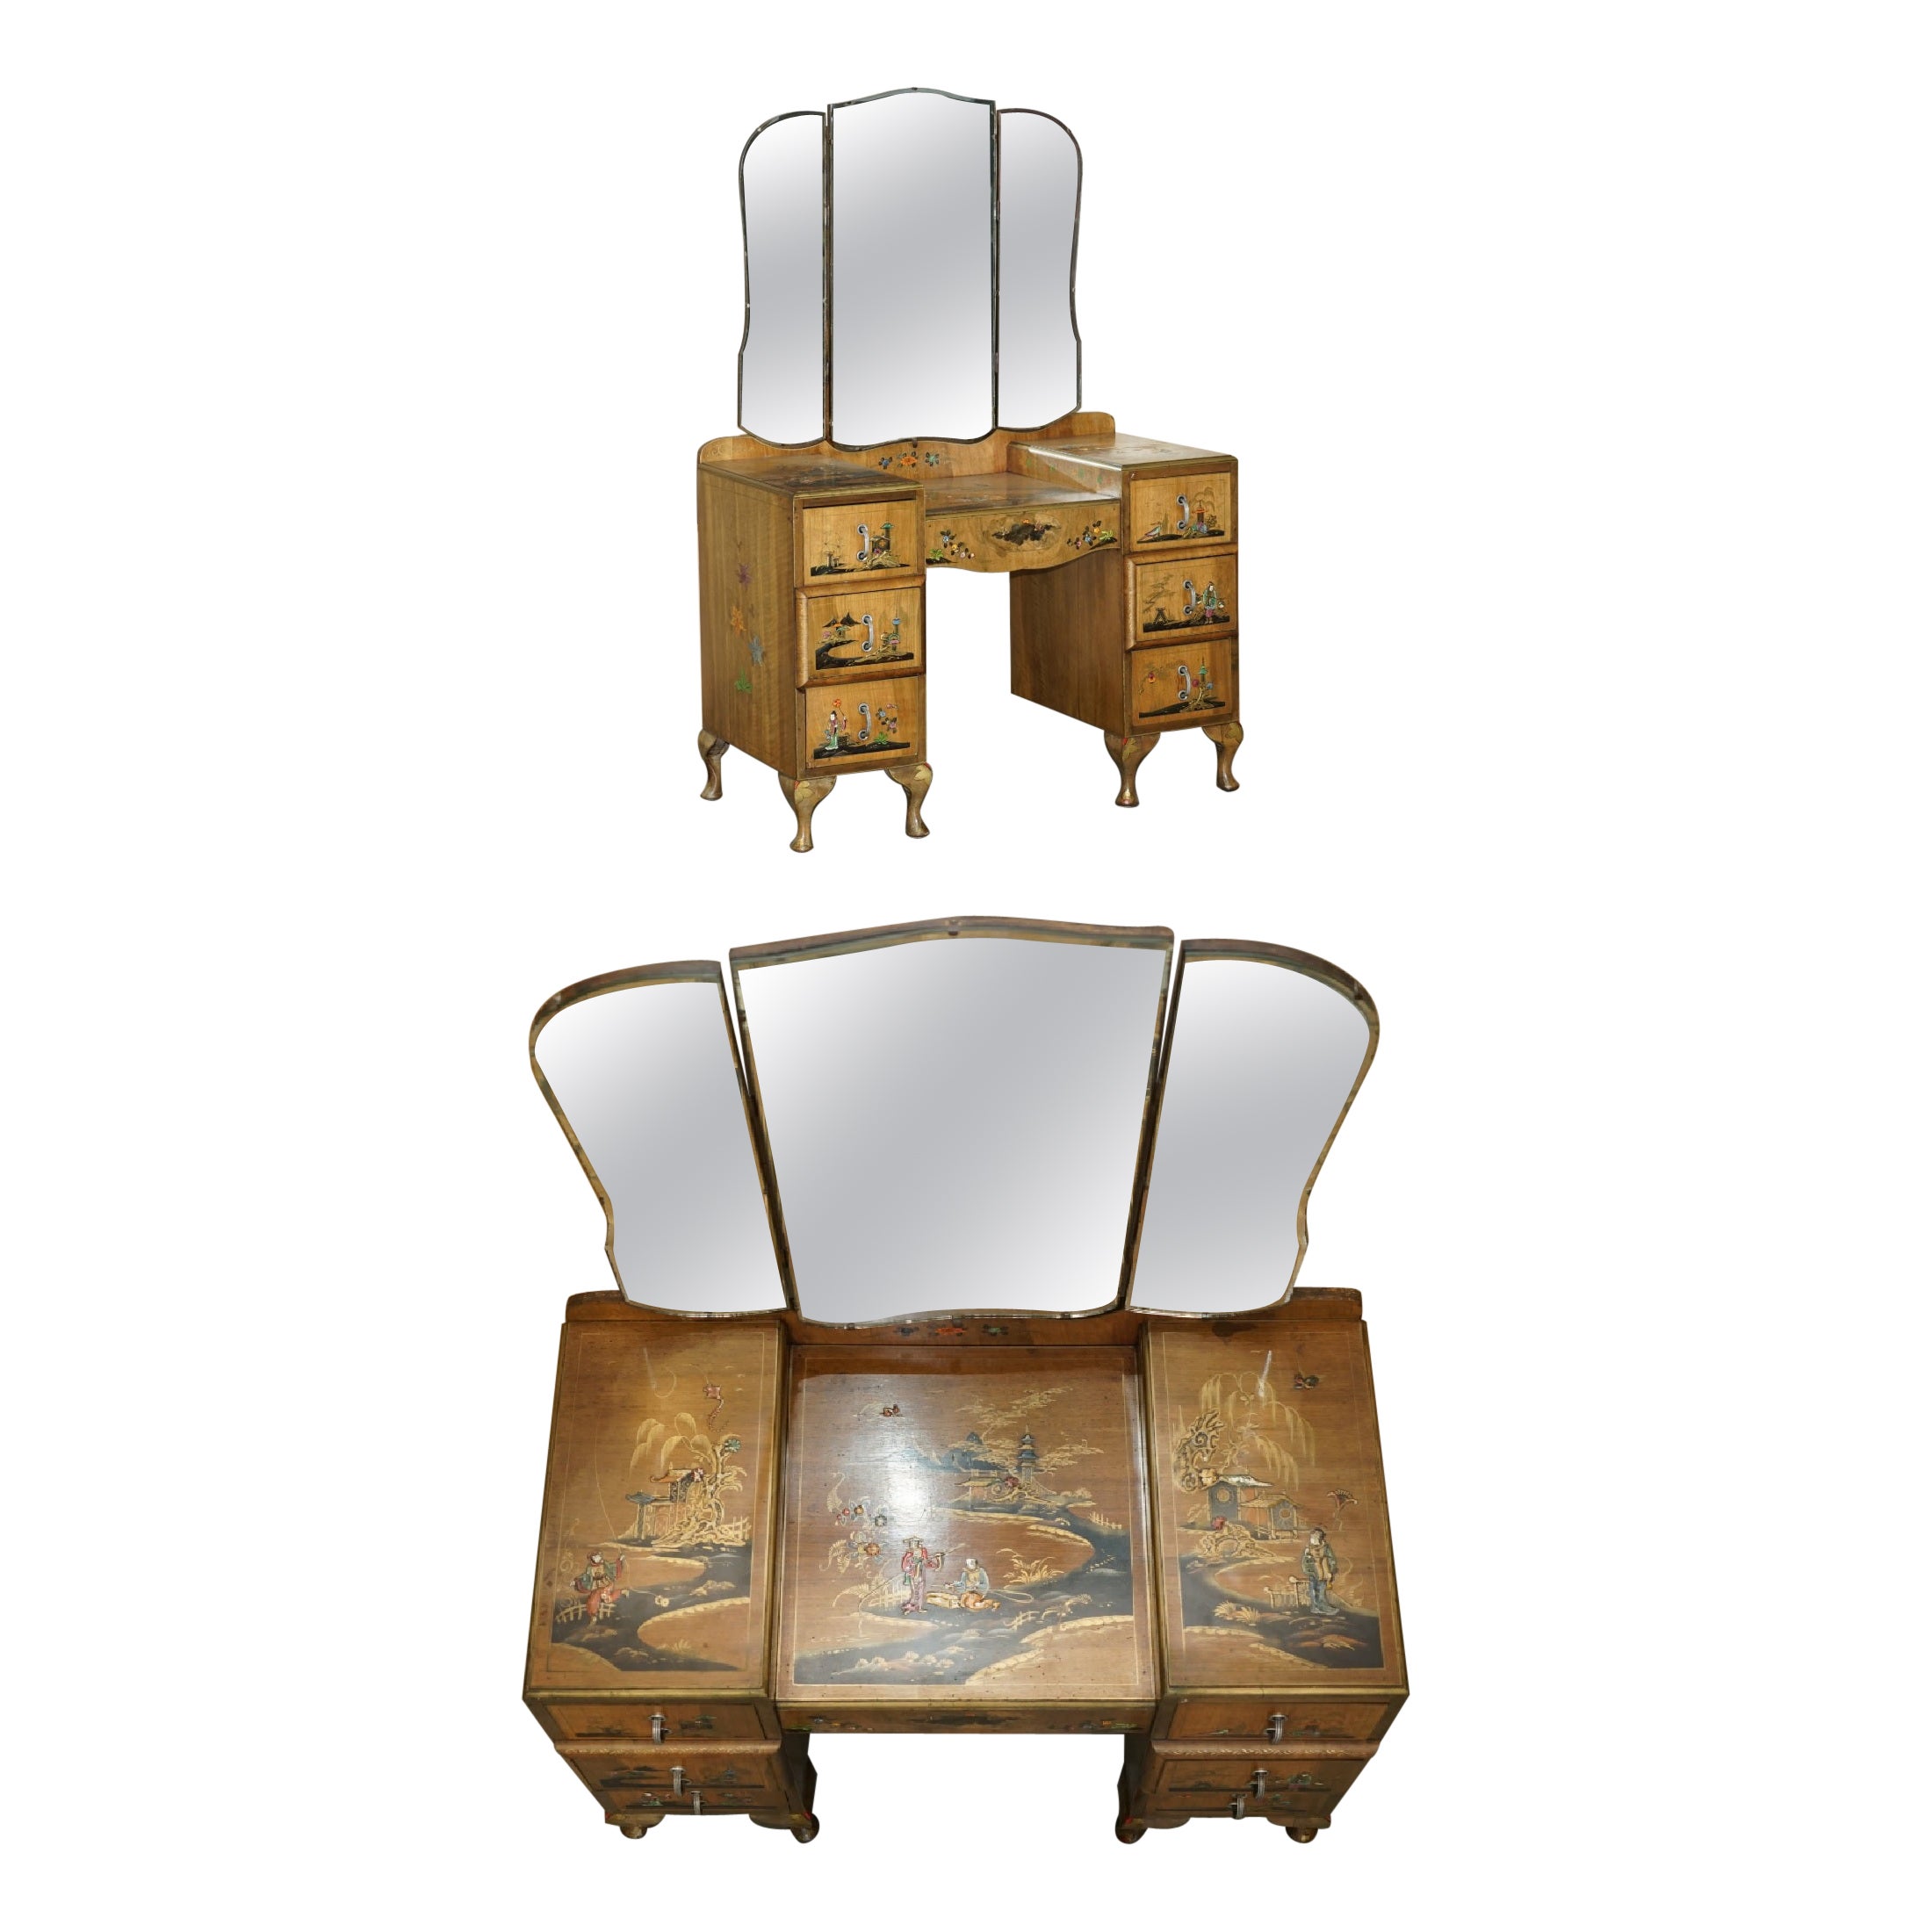 EXQUISITE CHiNESE EXPORT CHINOISERIE WALNUT DRESSING TABLE PART OF A SUITe For Sale